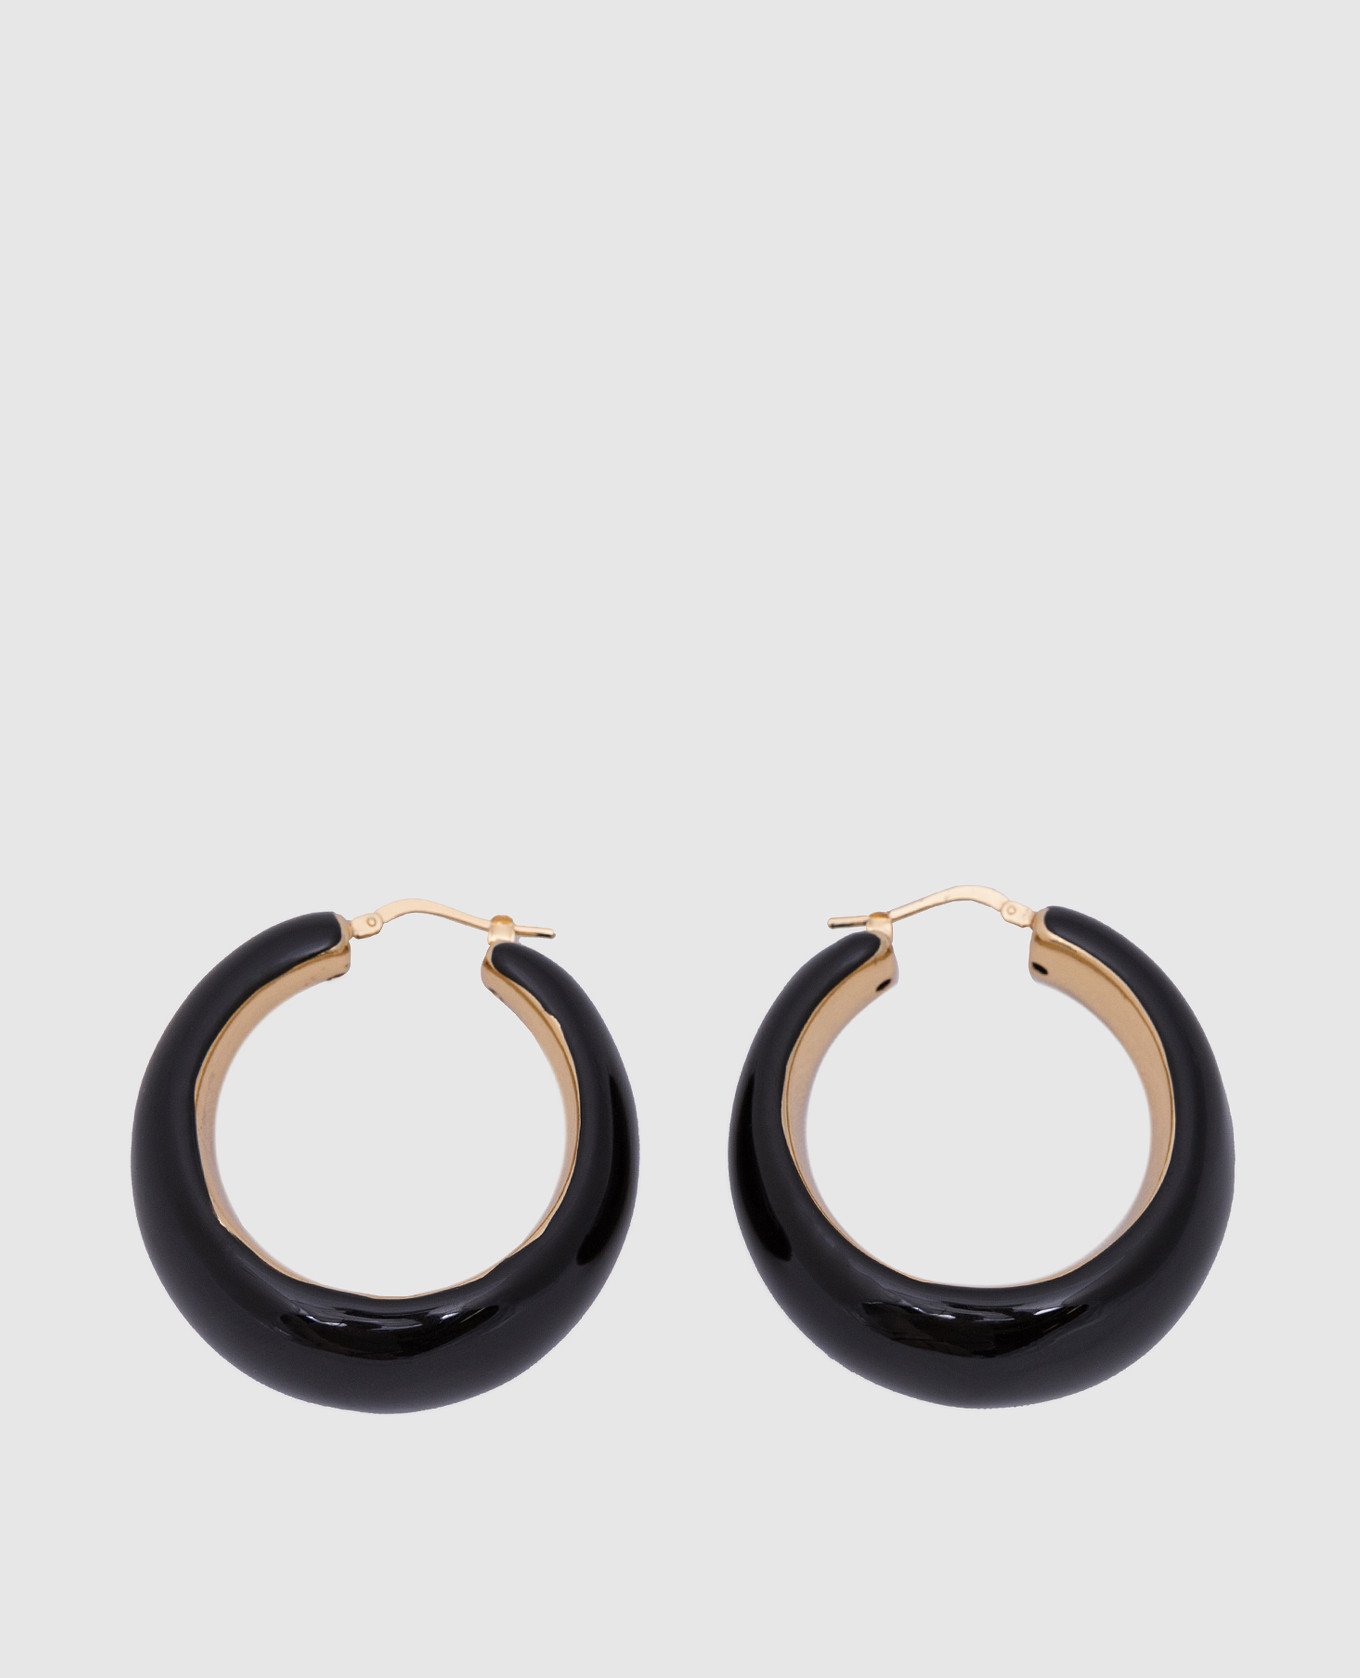 Colette black Congo earrings with 24k gold plating